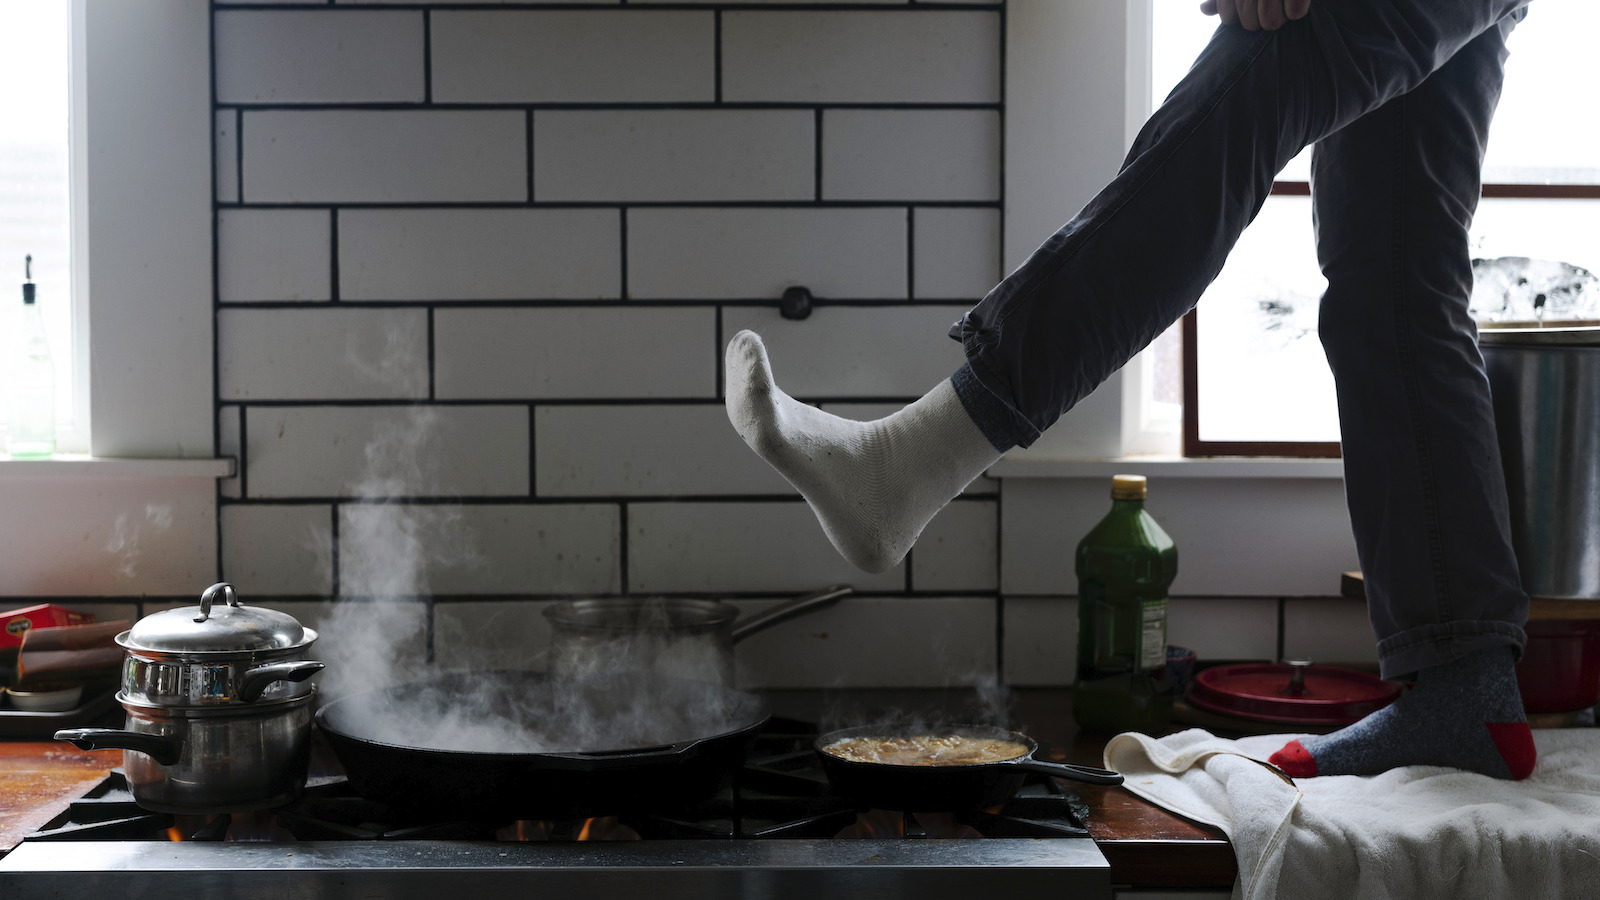 A person stands on a kitchen counter with their foot extended over their gas stove for warmth